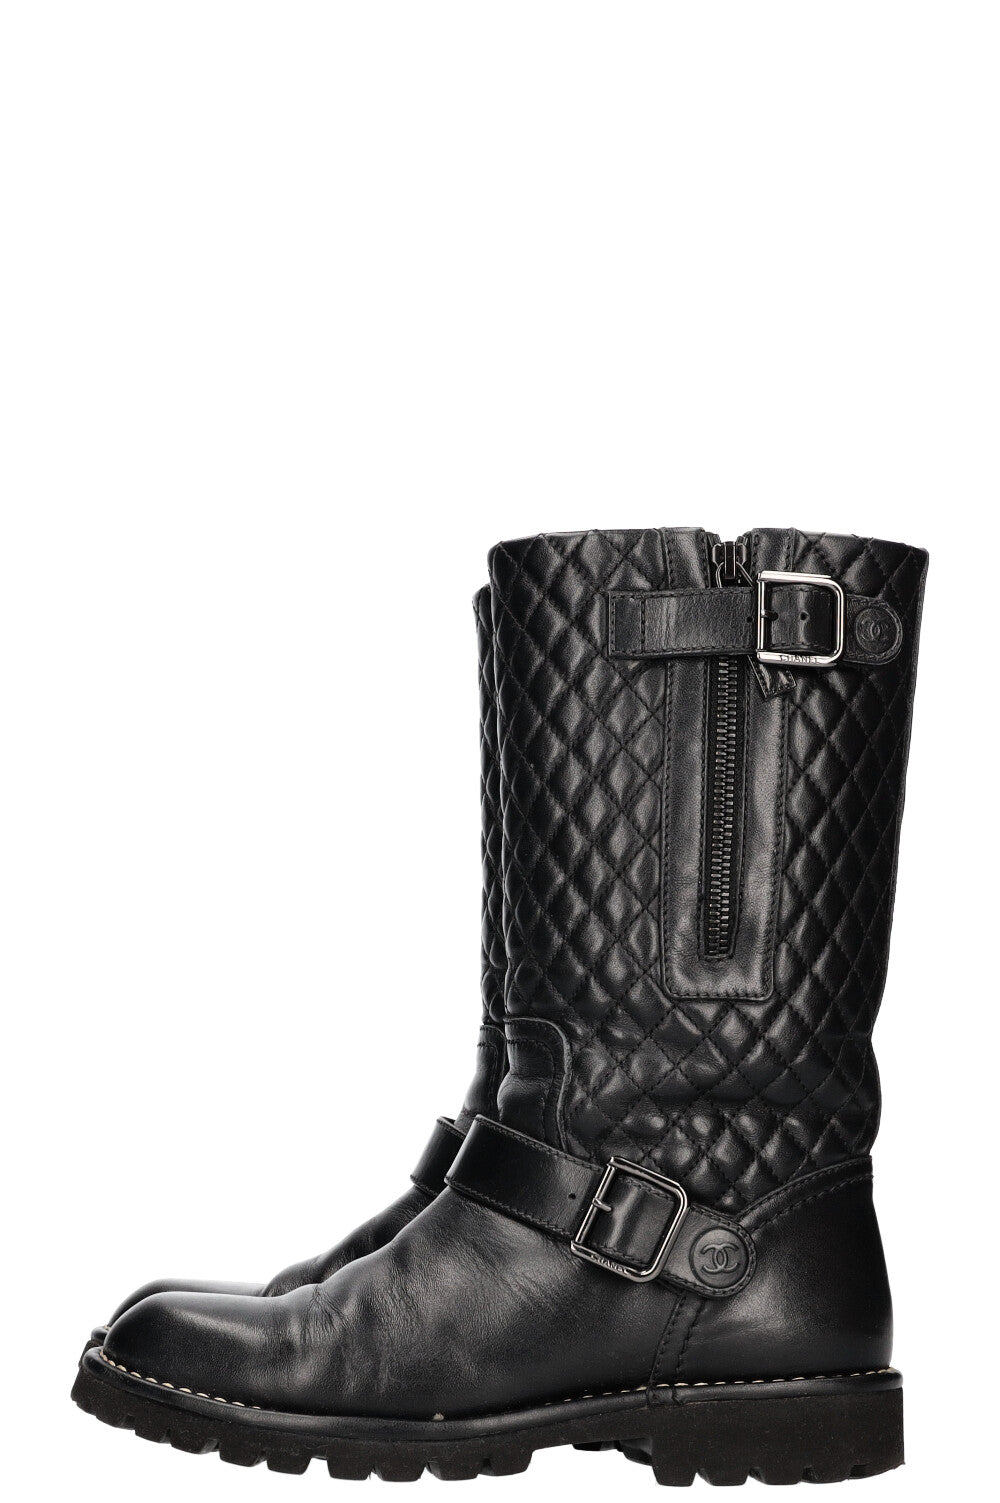 CHANEL Quilted Motorcycle Boots Black Leather